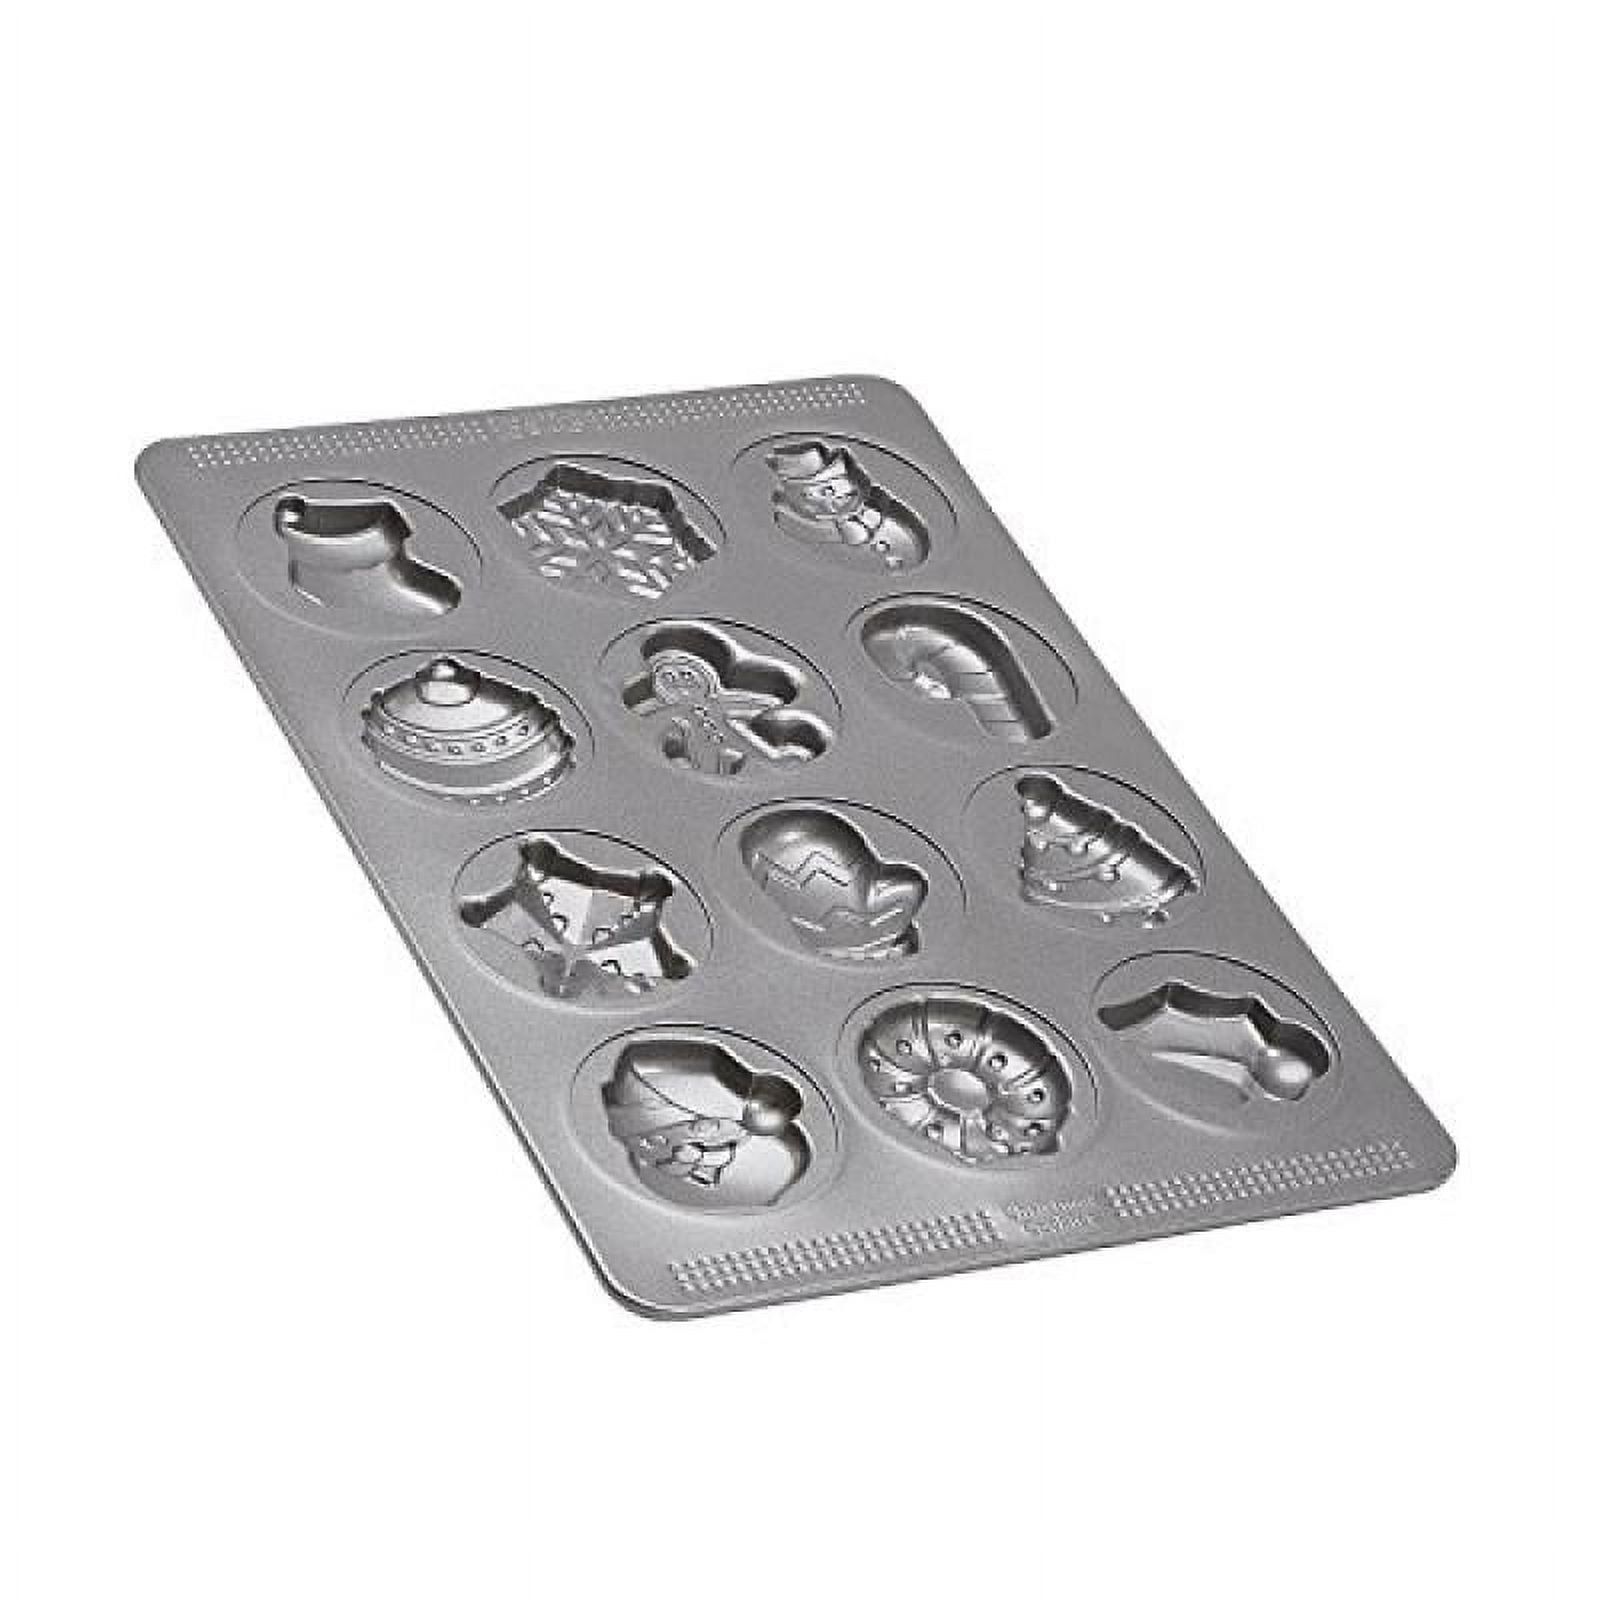 PizzAtHome 12-Inch Cookie Sheet Pan One-Handed Gripping Non